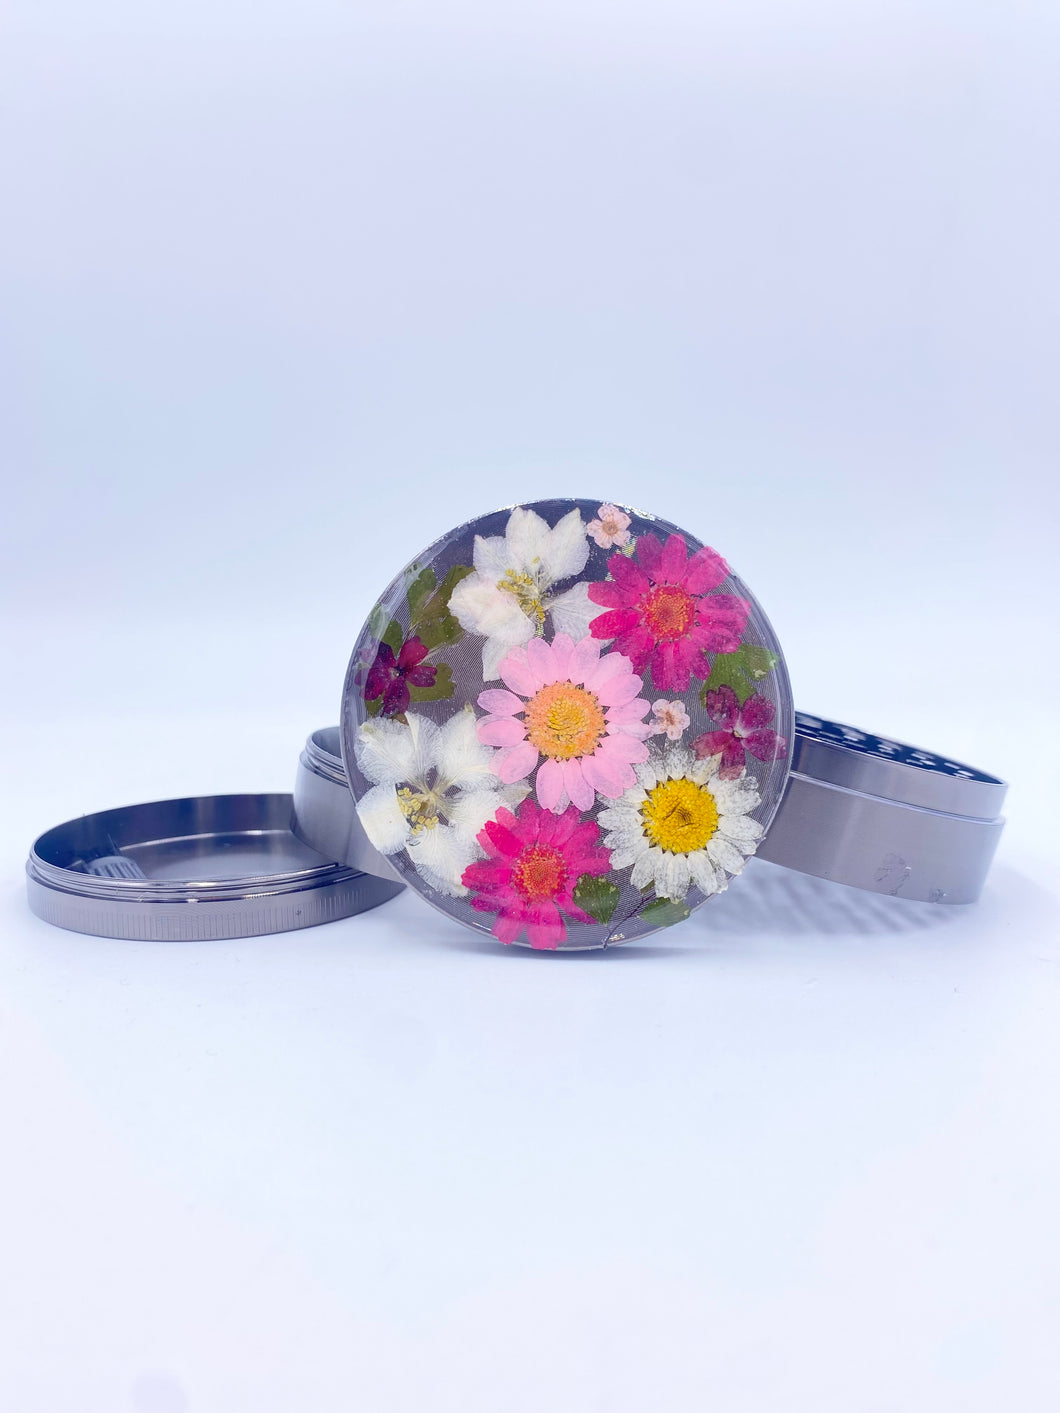 grinder covered with real flowers